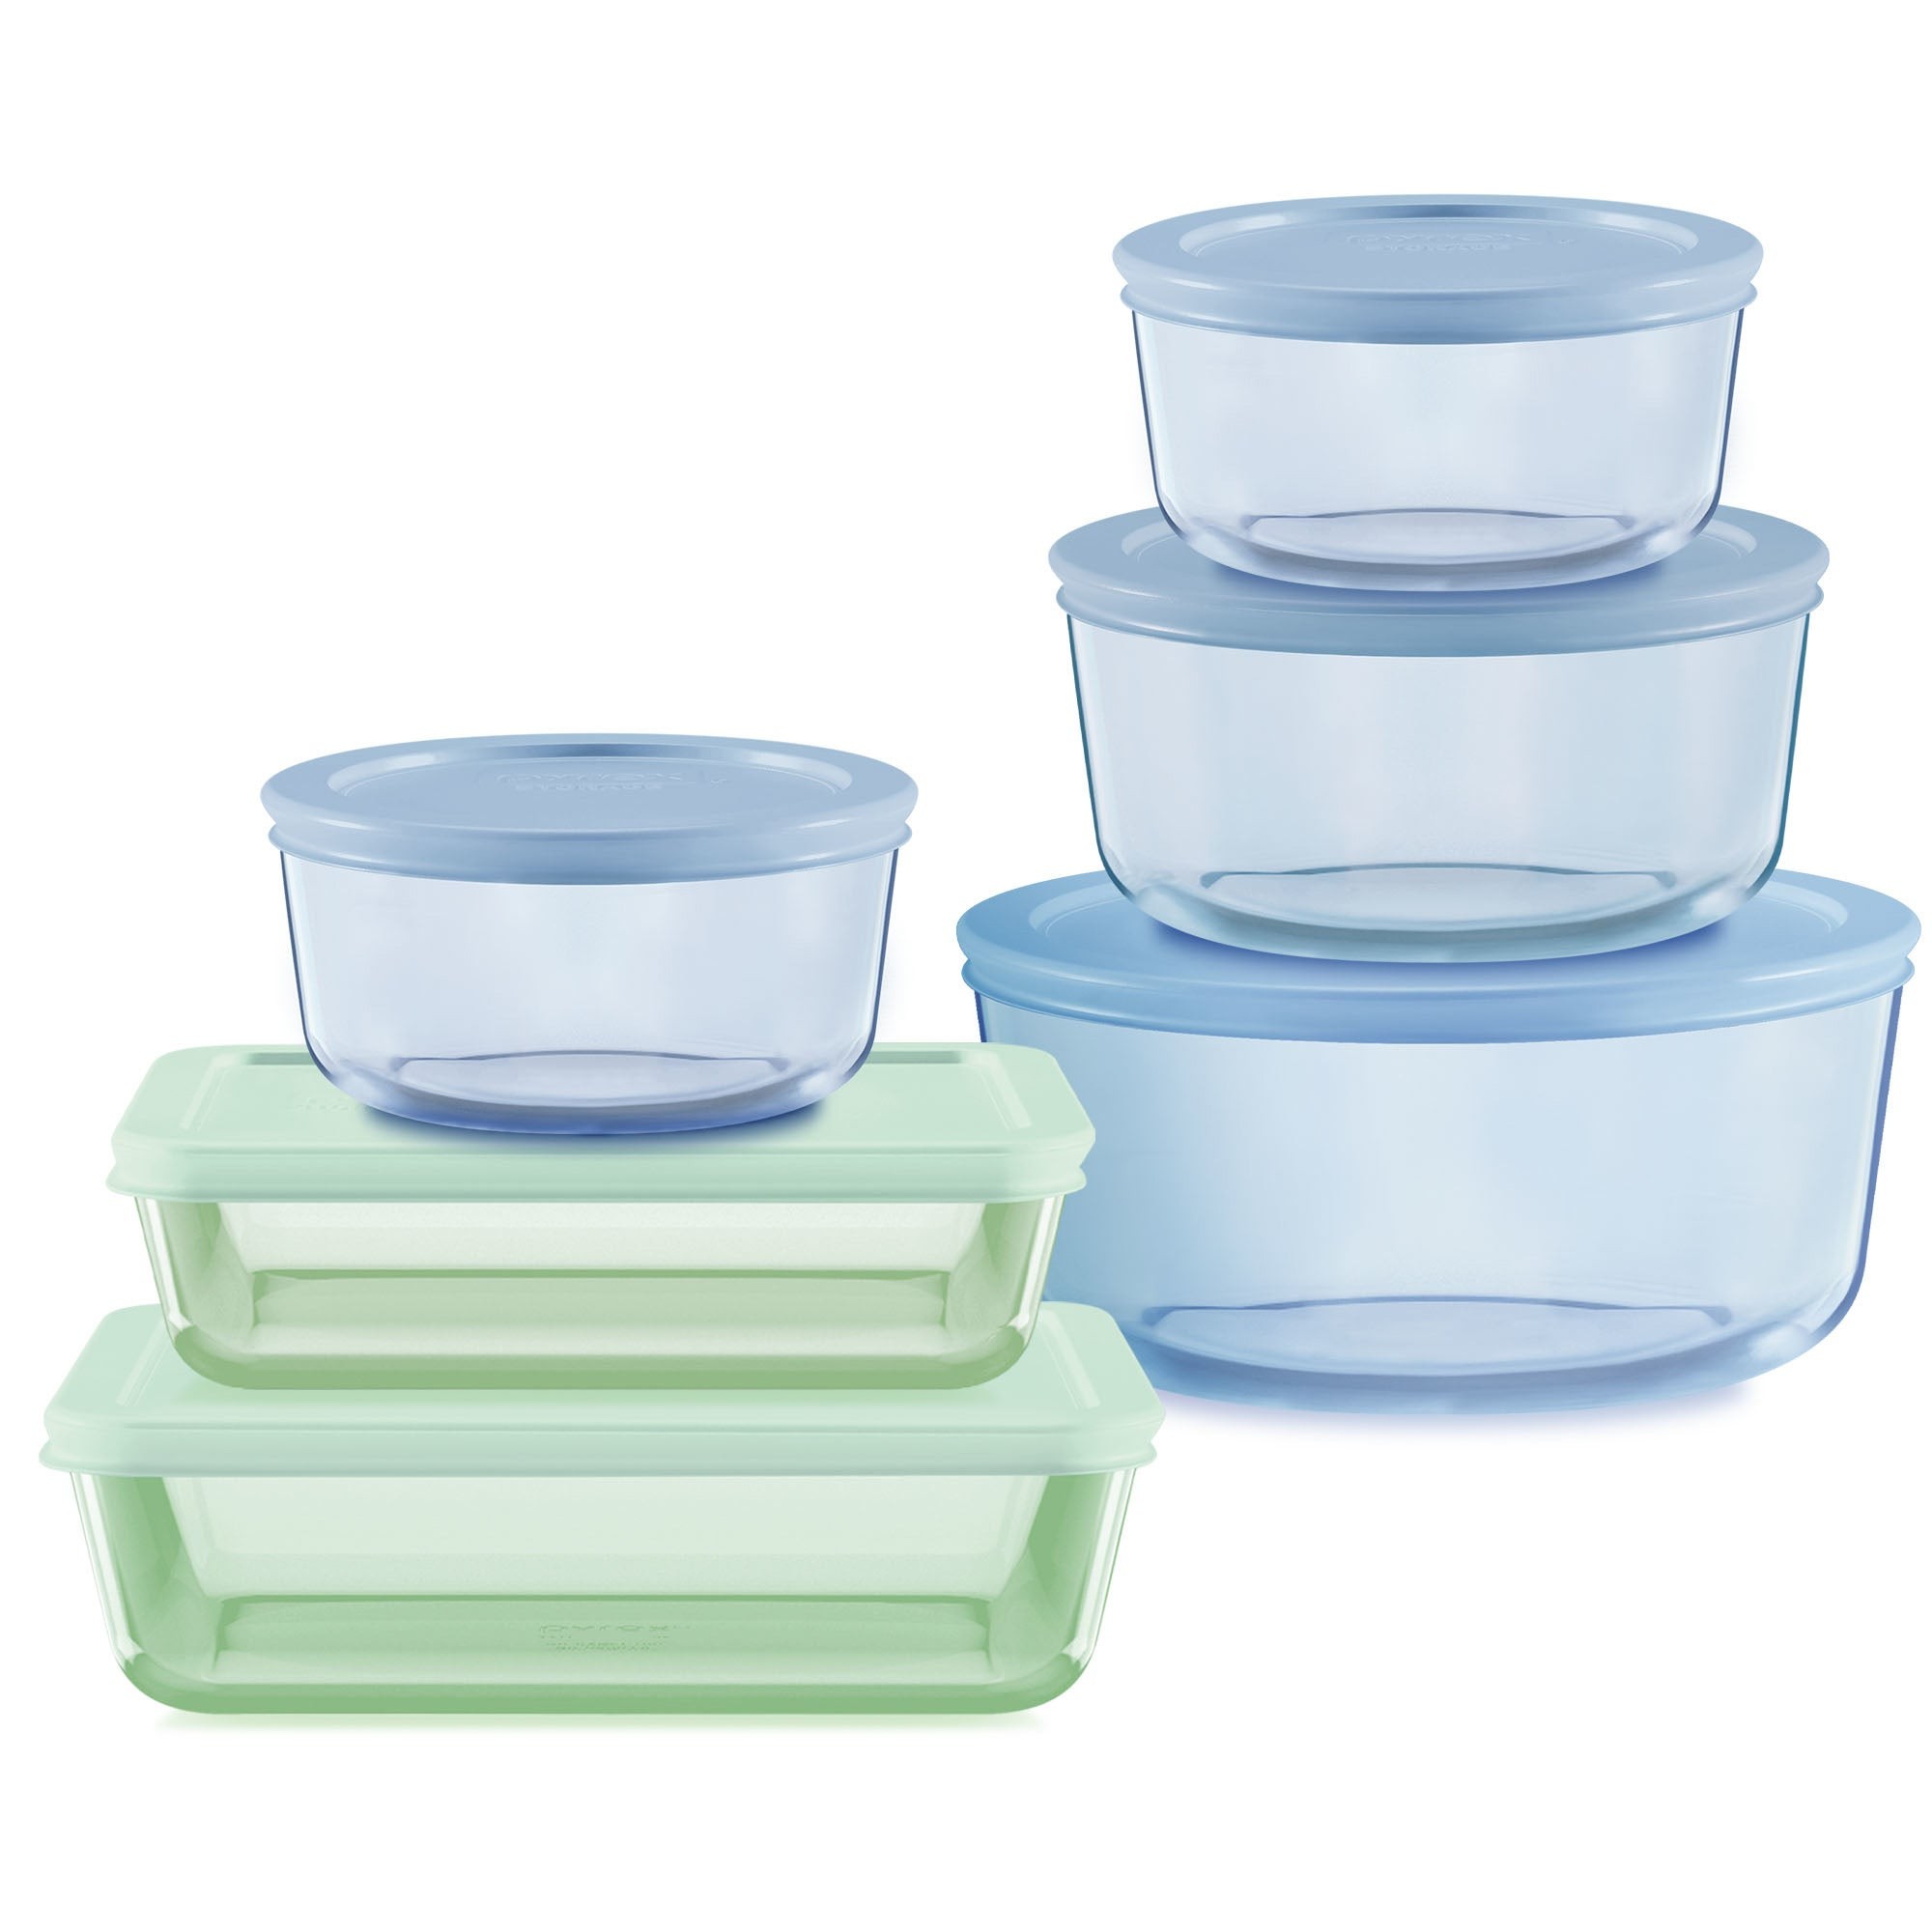 12pc Simply Store Tinted Glass Food Storage Set Green & Blue